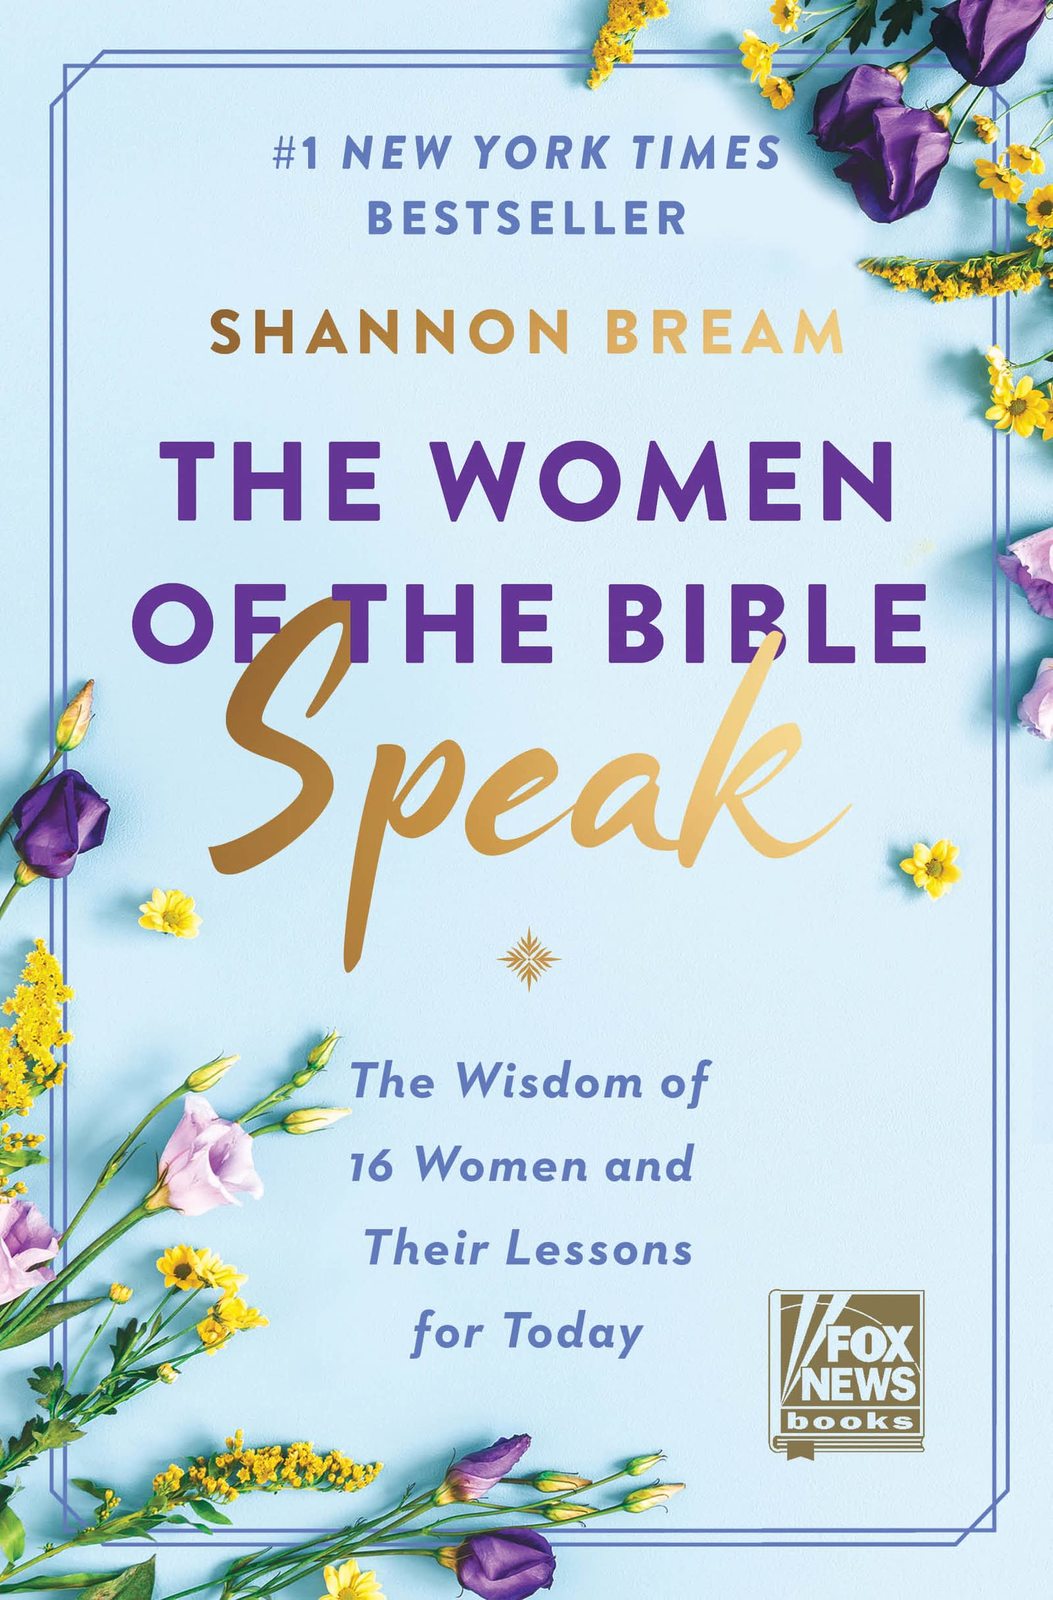 The Women of the Bible Speak: The Wisdom of 16 Women and Their Lessons for Today - $17.99